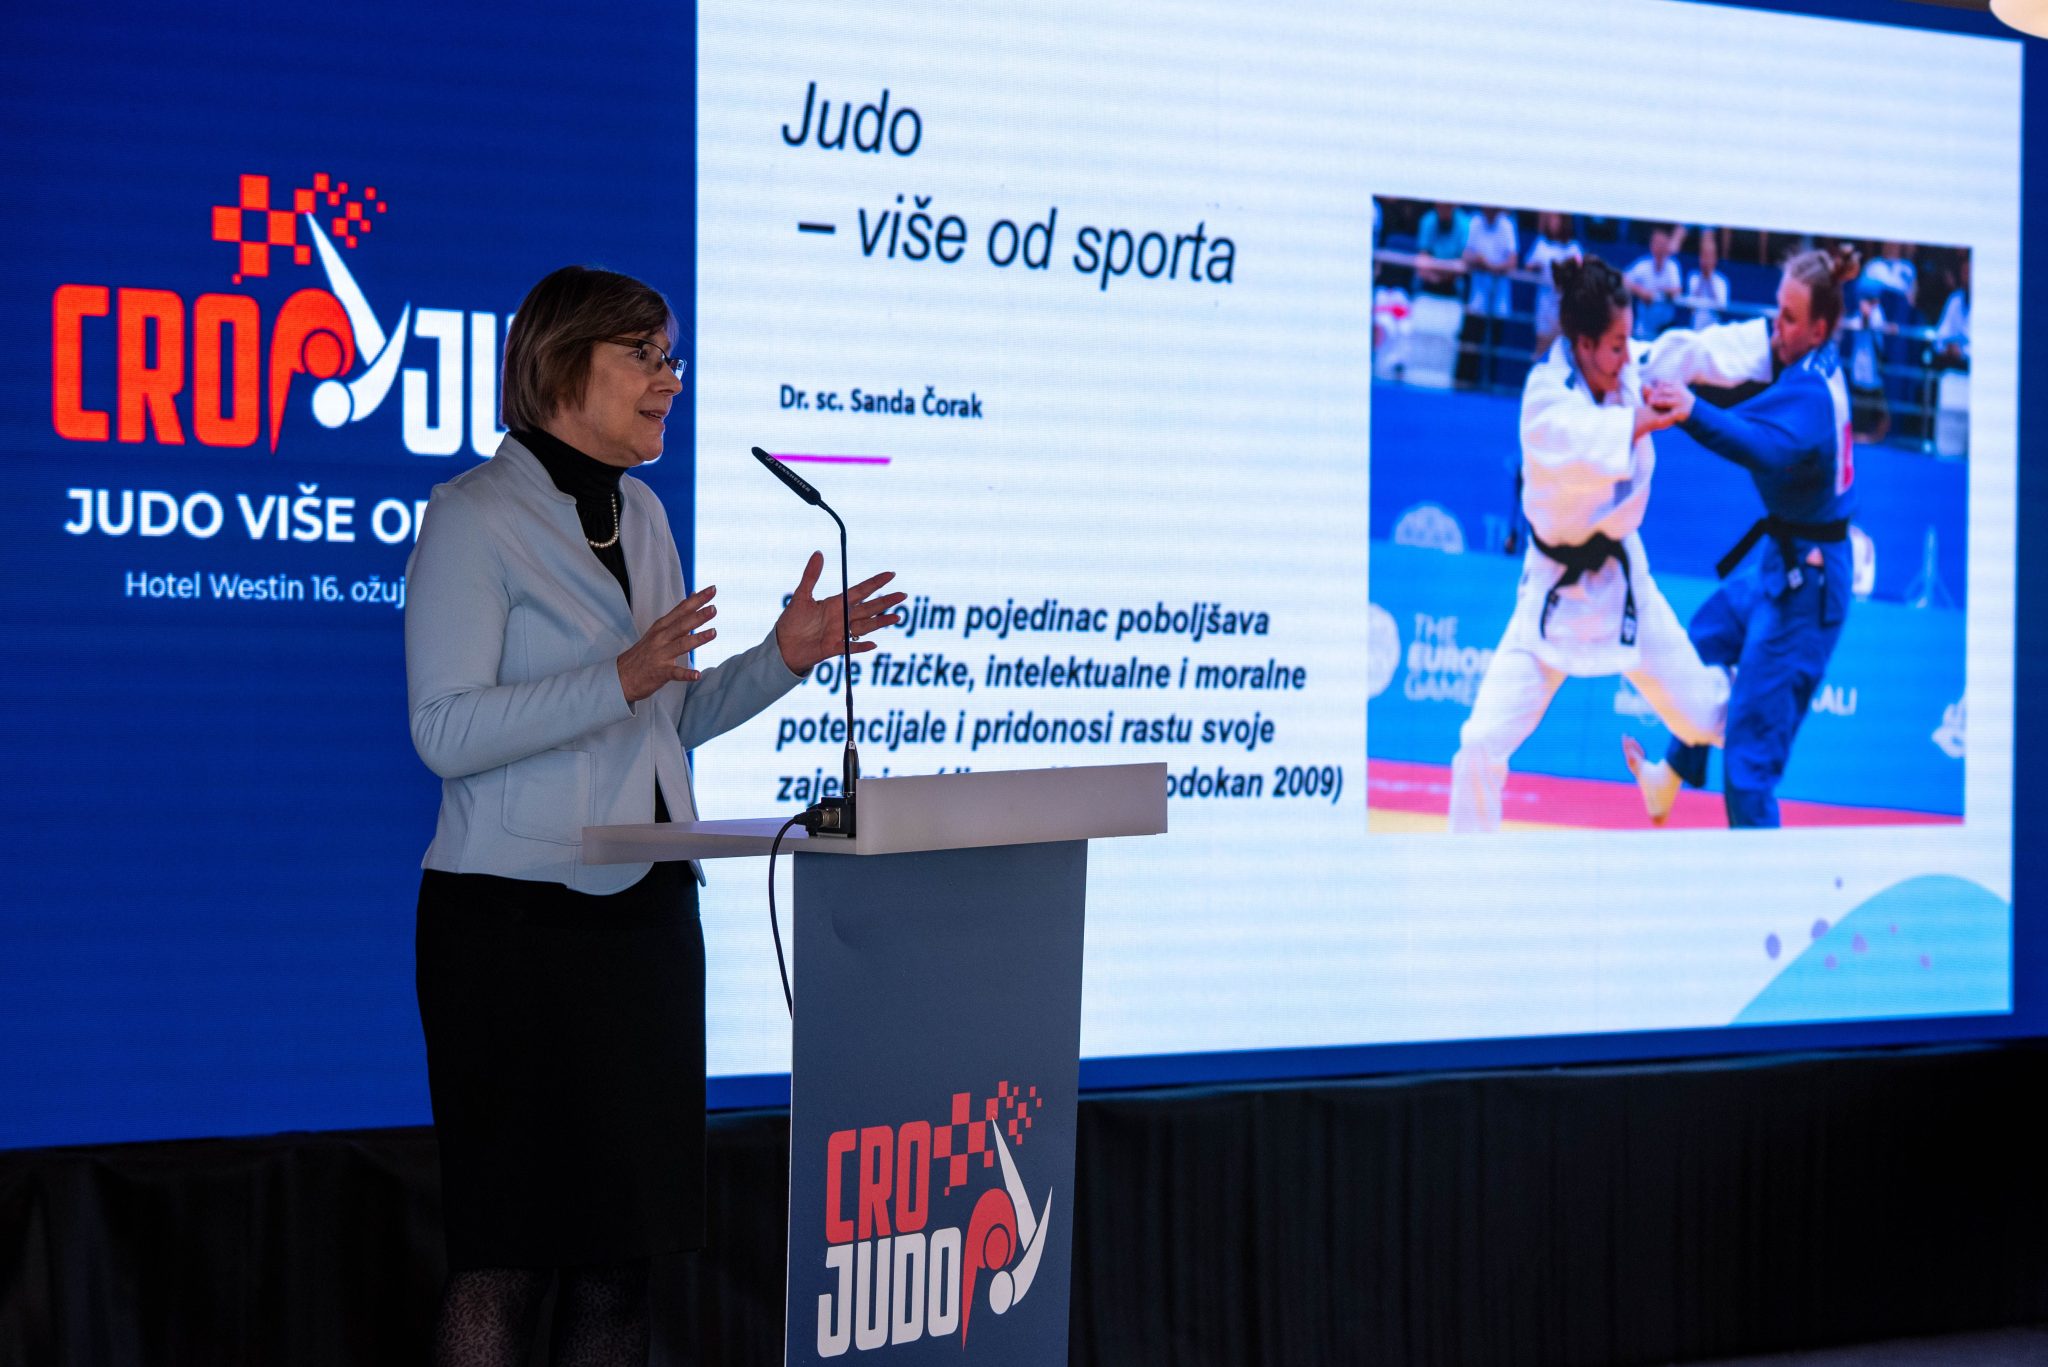 SANDA ČORAK: "Without the sustainable development of sports, there is no sustainable future for society."